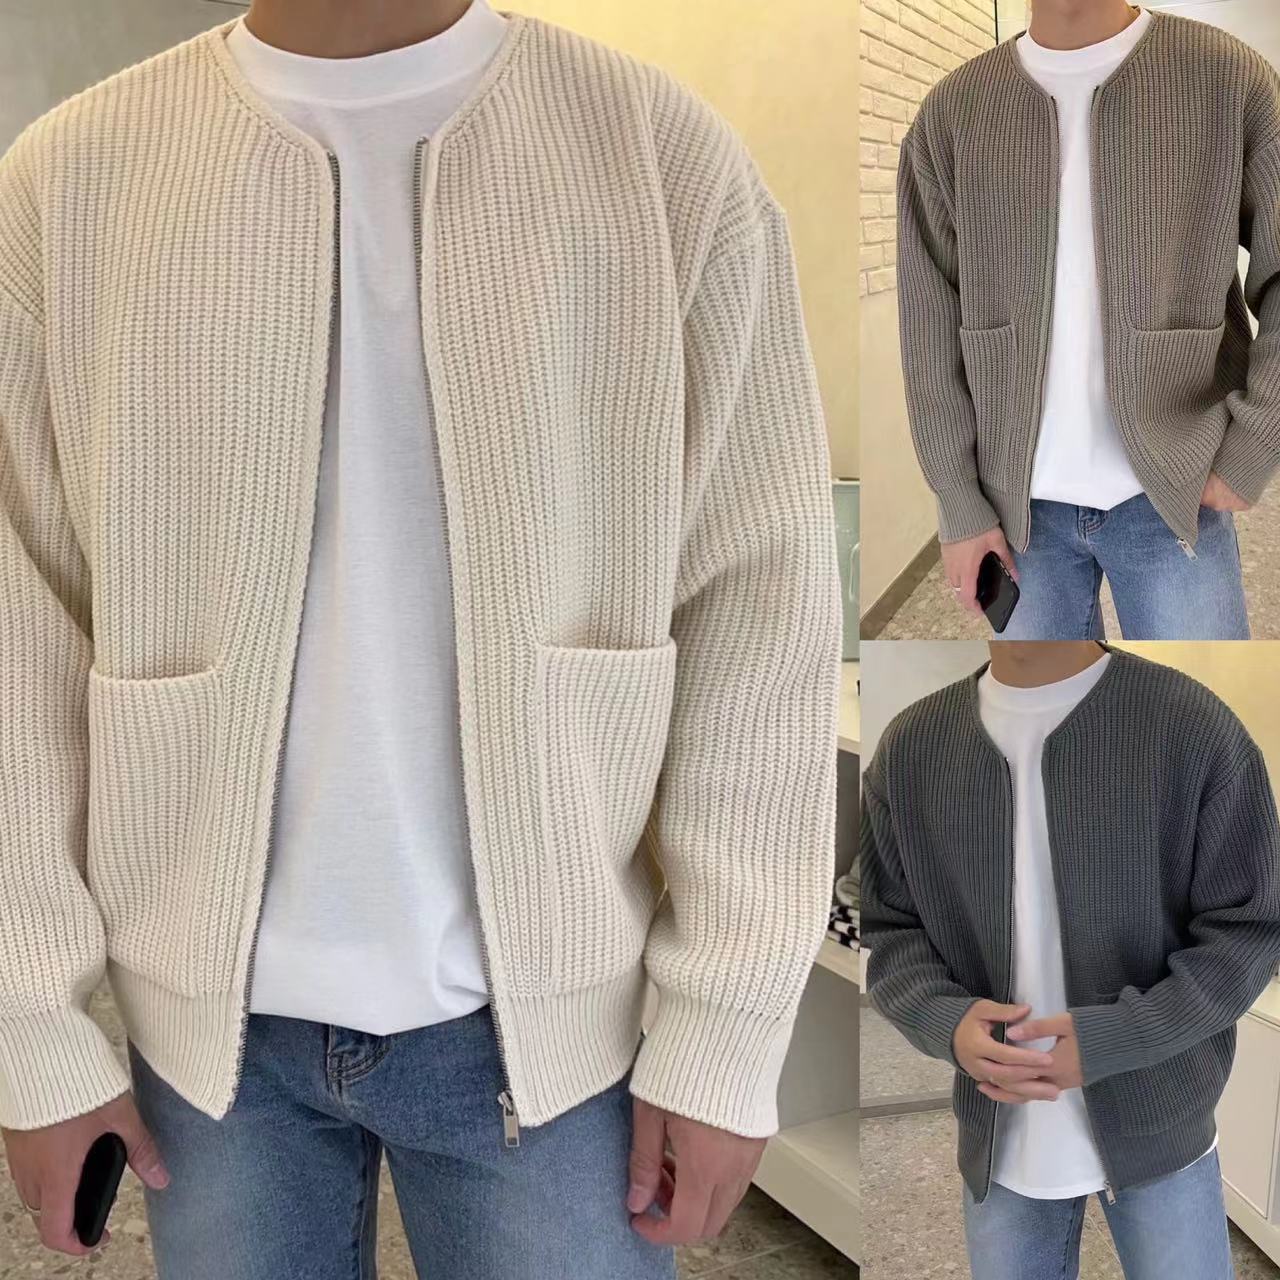 Men's Fashion Trendy Knitted Cardigan Sweater